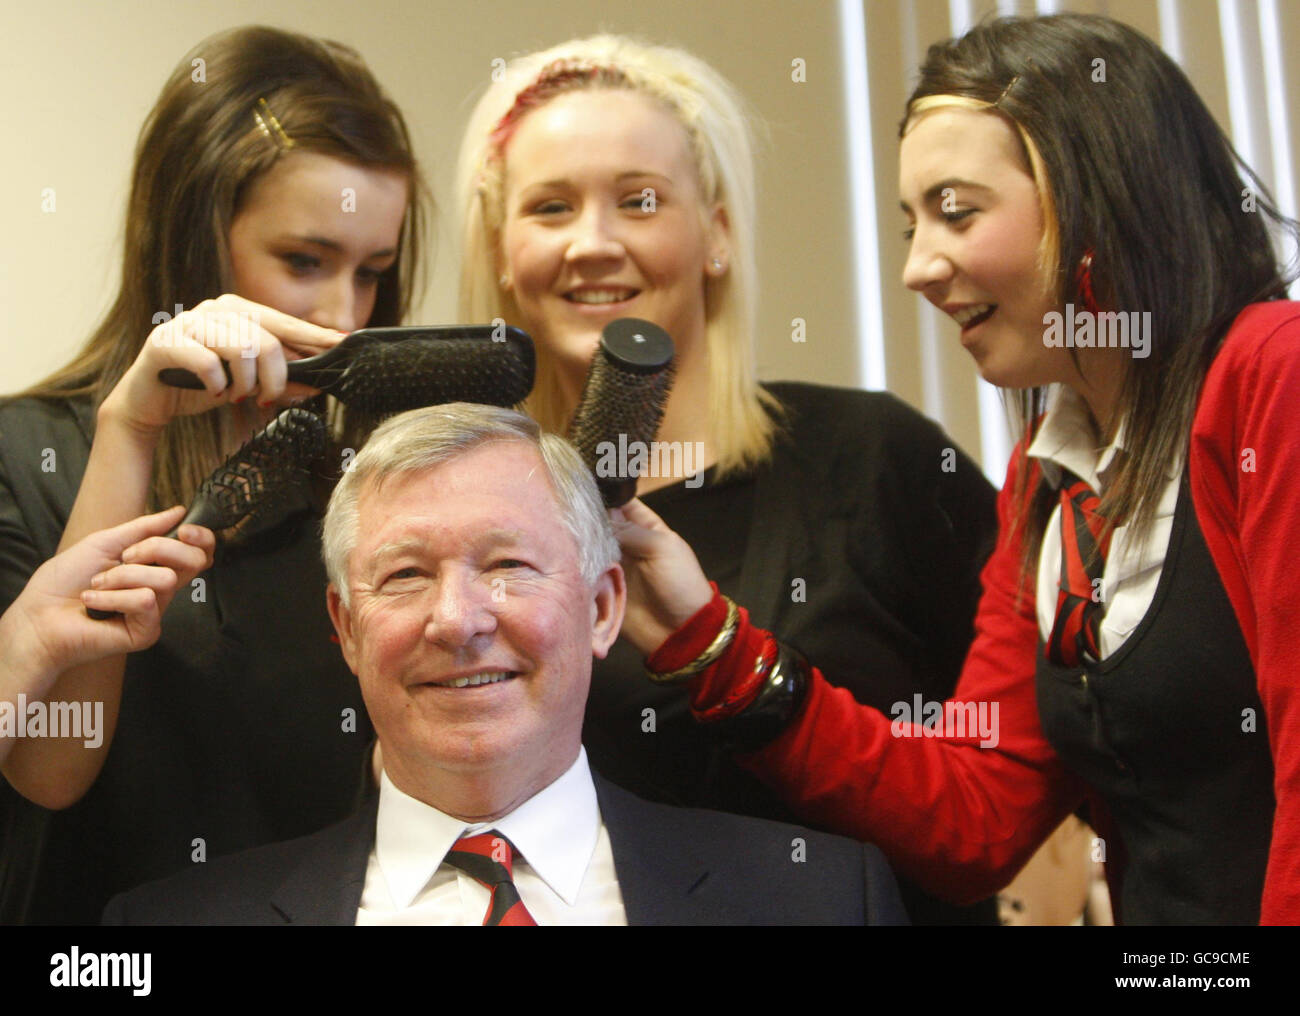 Manchester United manager Sir Alex Ferguson with students (left to right) Nicola Hunter, Emma Hanley and Mairead Linning, during a visit to the hair dressing department in his former school, Govan High School, which this year celebrates its 100th anniversary. Stock Photo